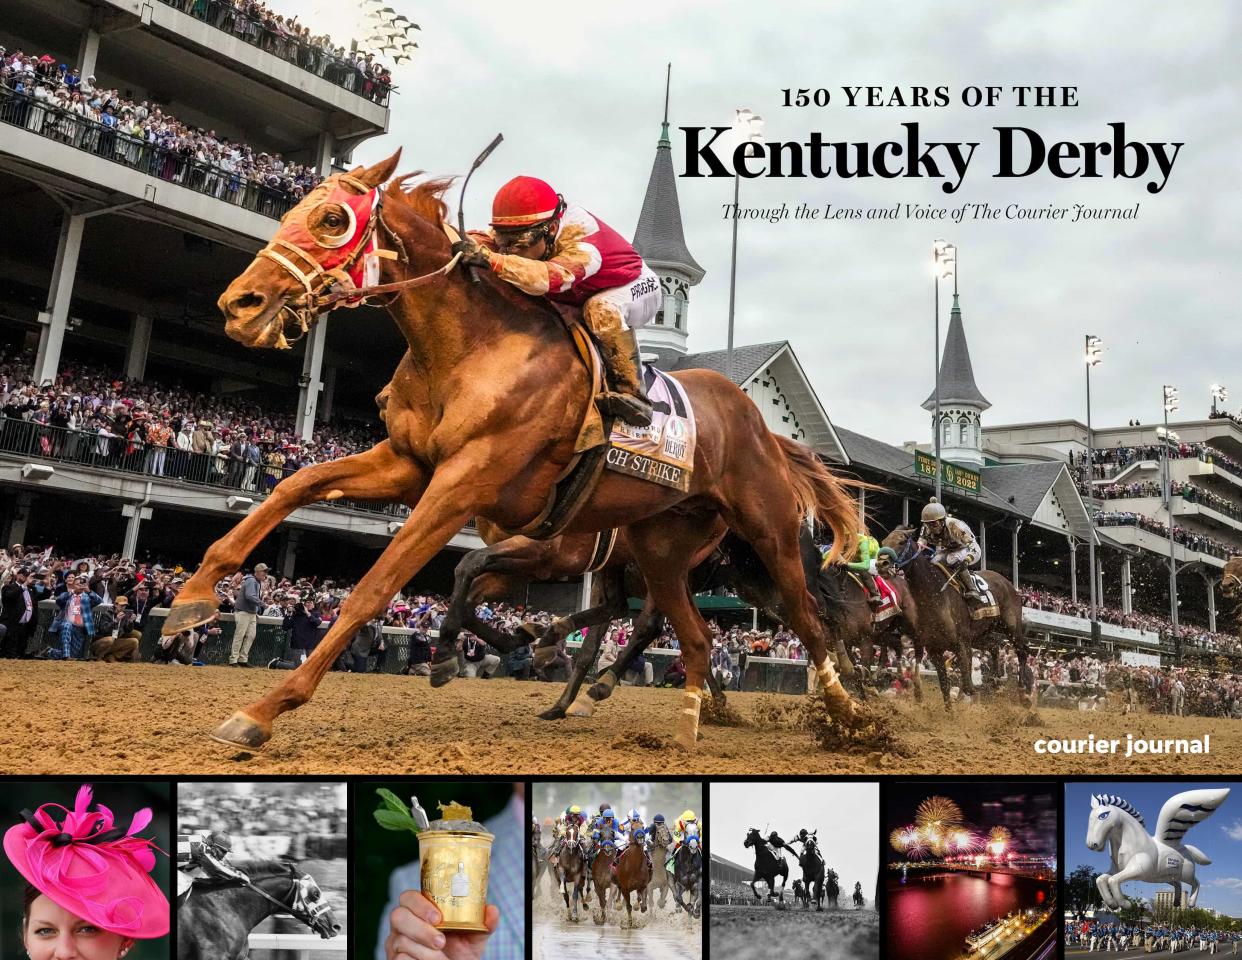 Pre-orders are now available for "150 Years of the Kentucky Derby Through the Lena and Voice of the Courier Journal"